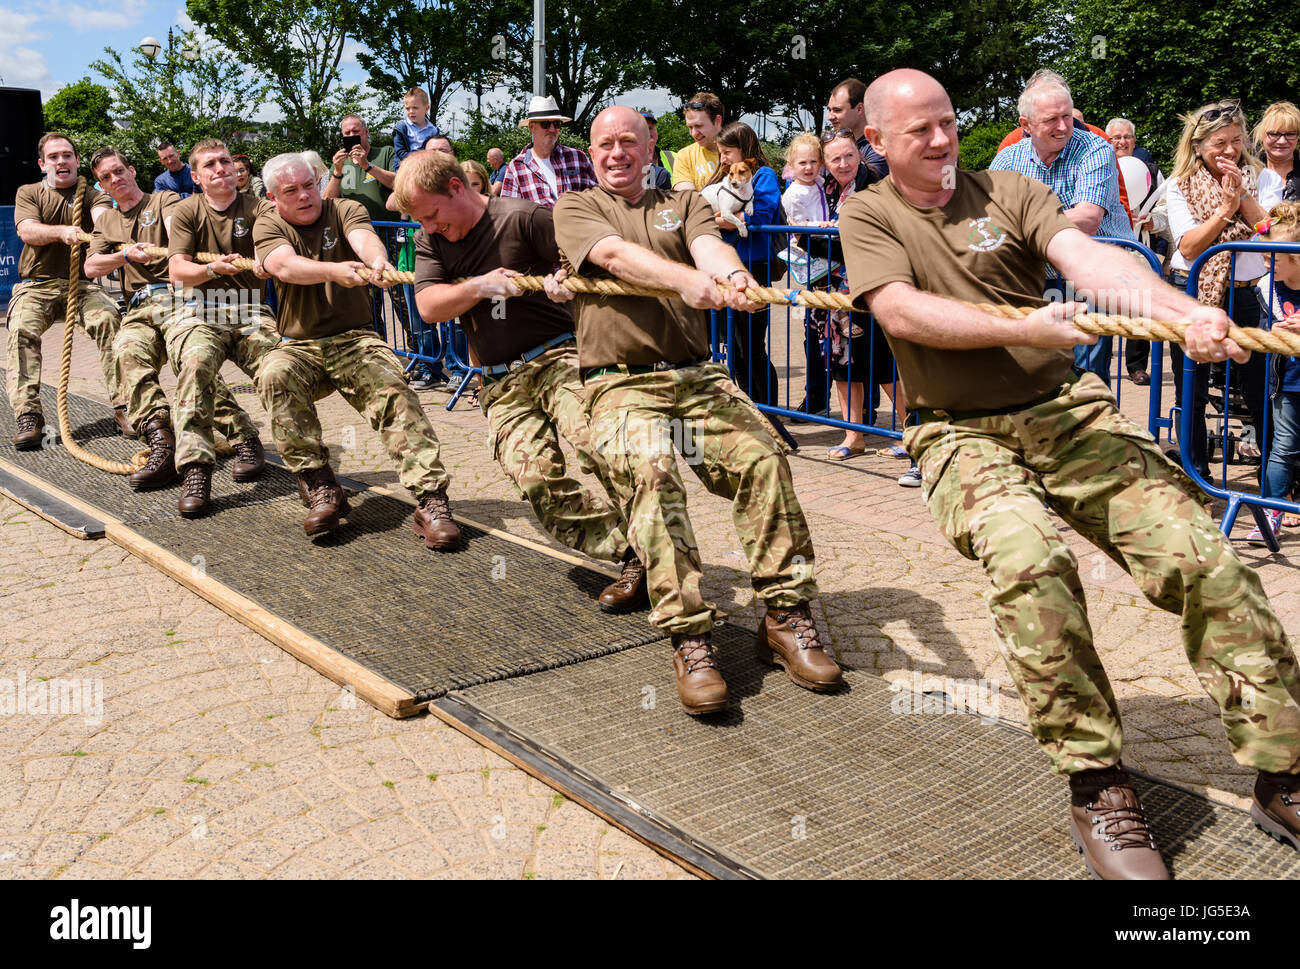 Soldiers take part in a tug-o-war strength test. Stock Photo